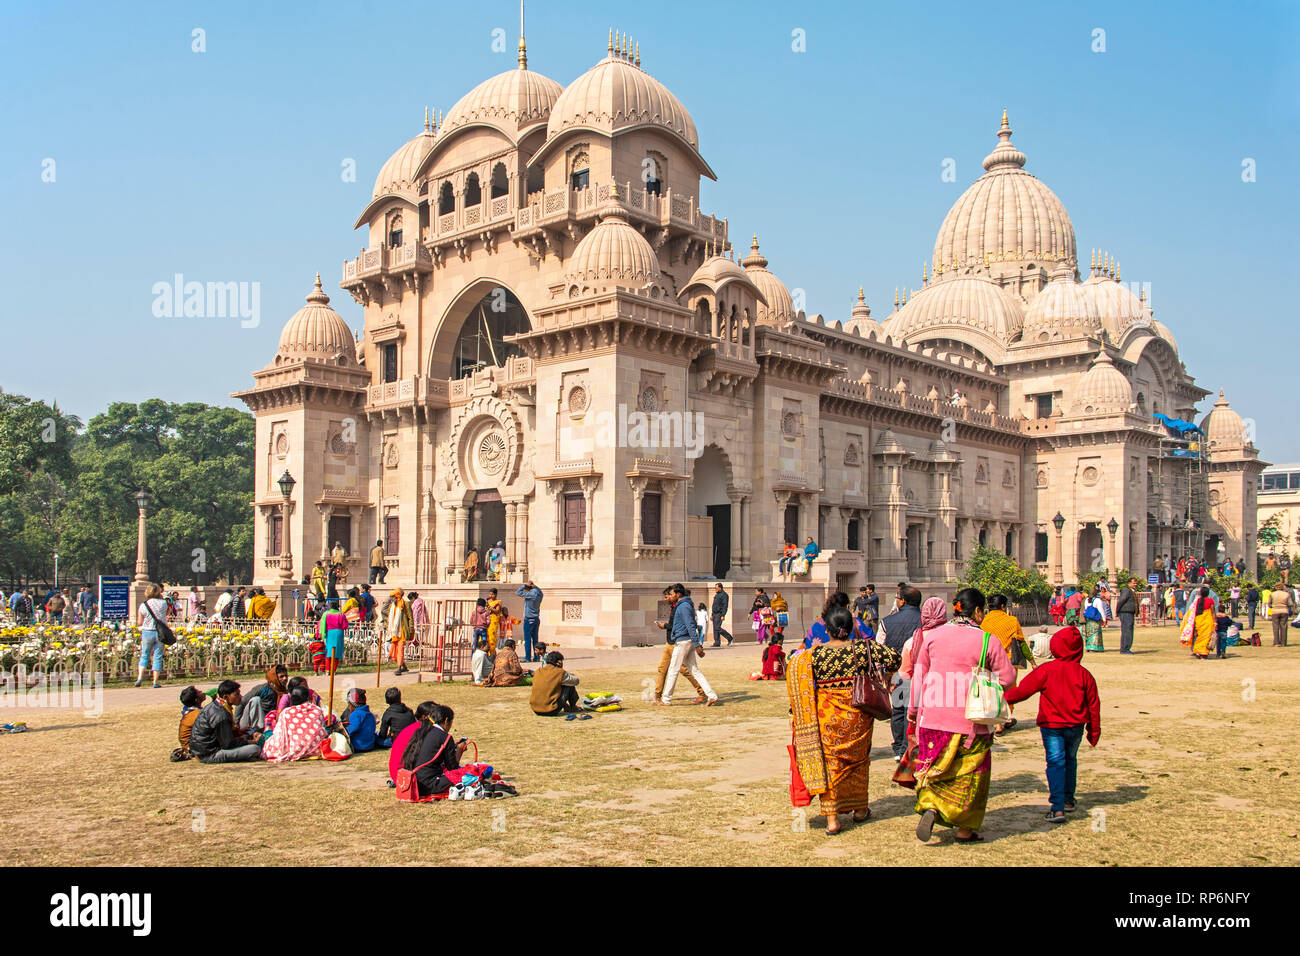 The Belur Math church in Kolkata with tourists and local people ...